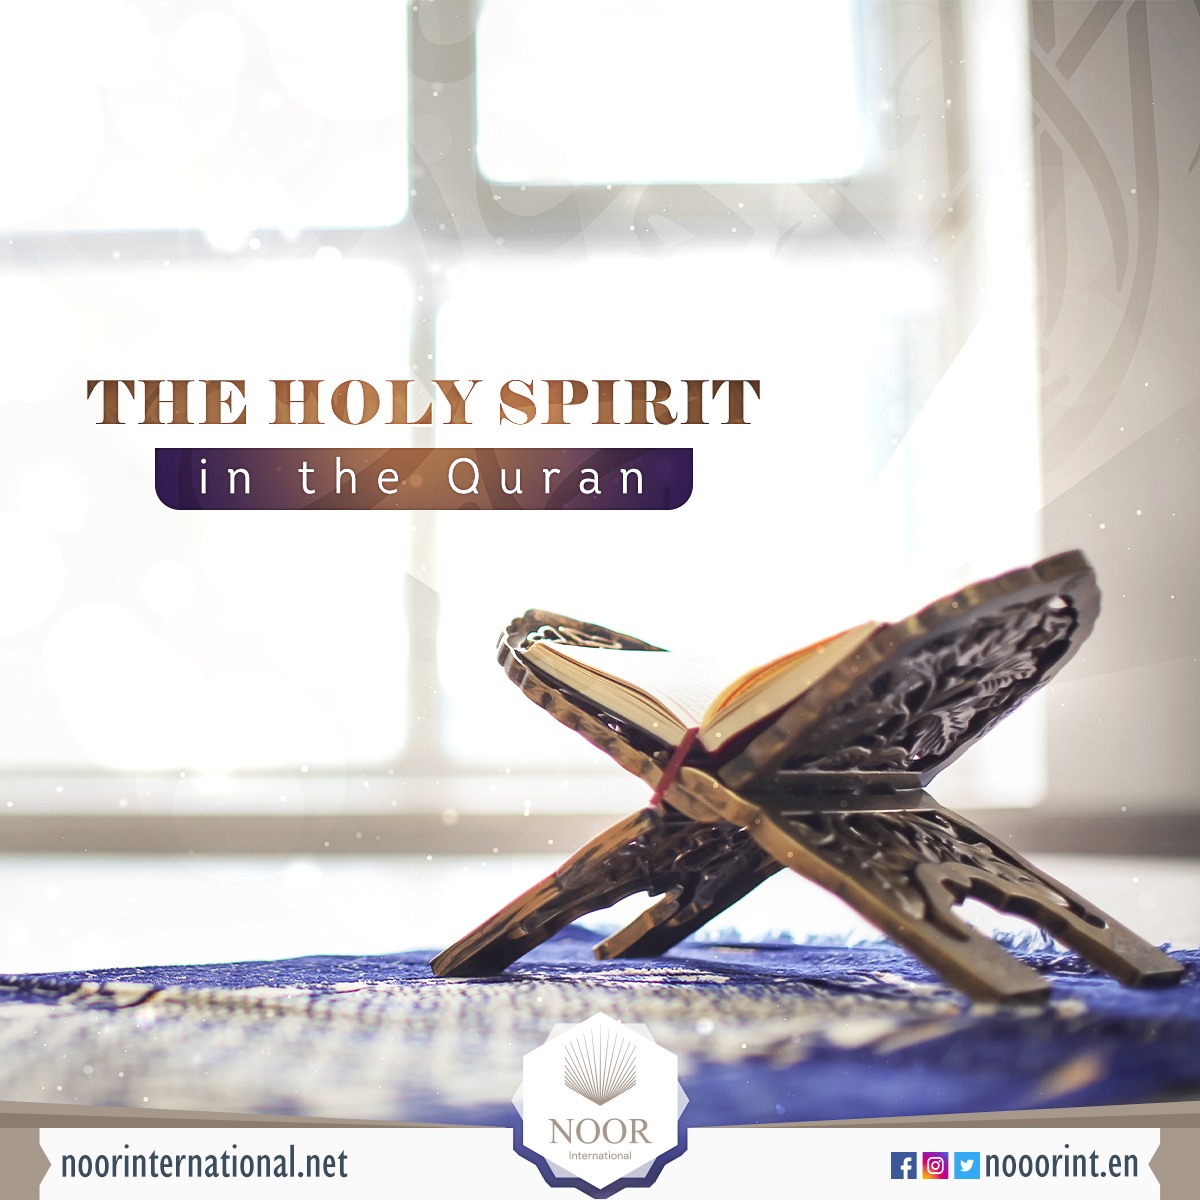 The Holy Spirit in the Quran